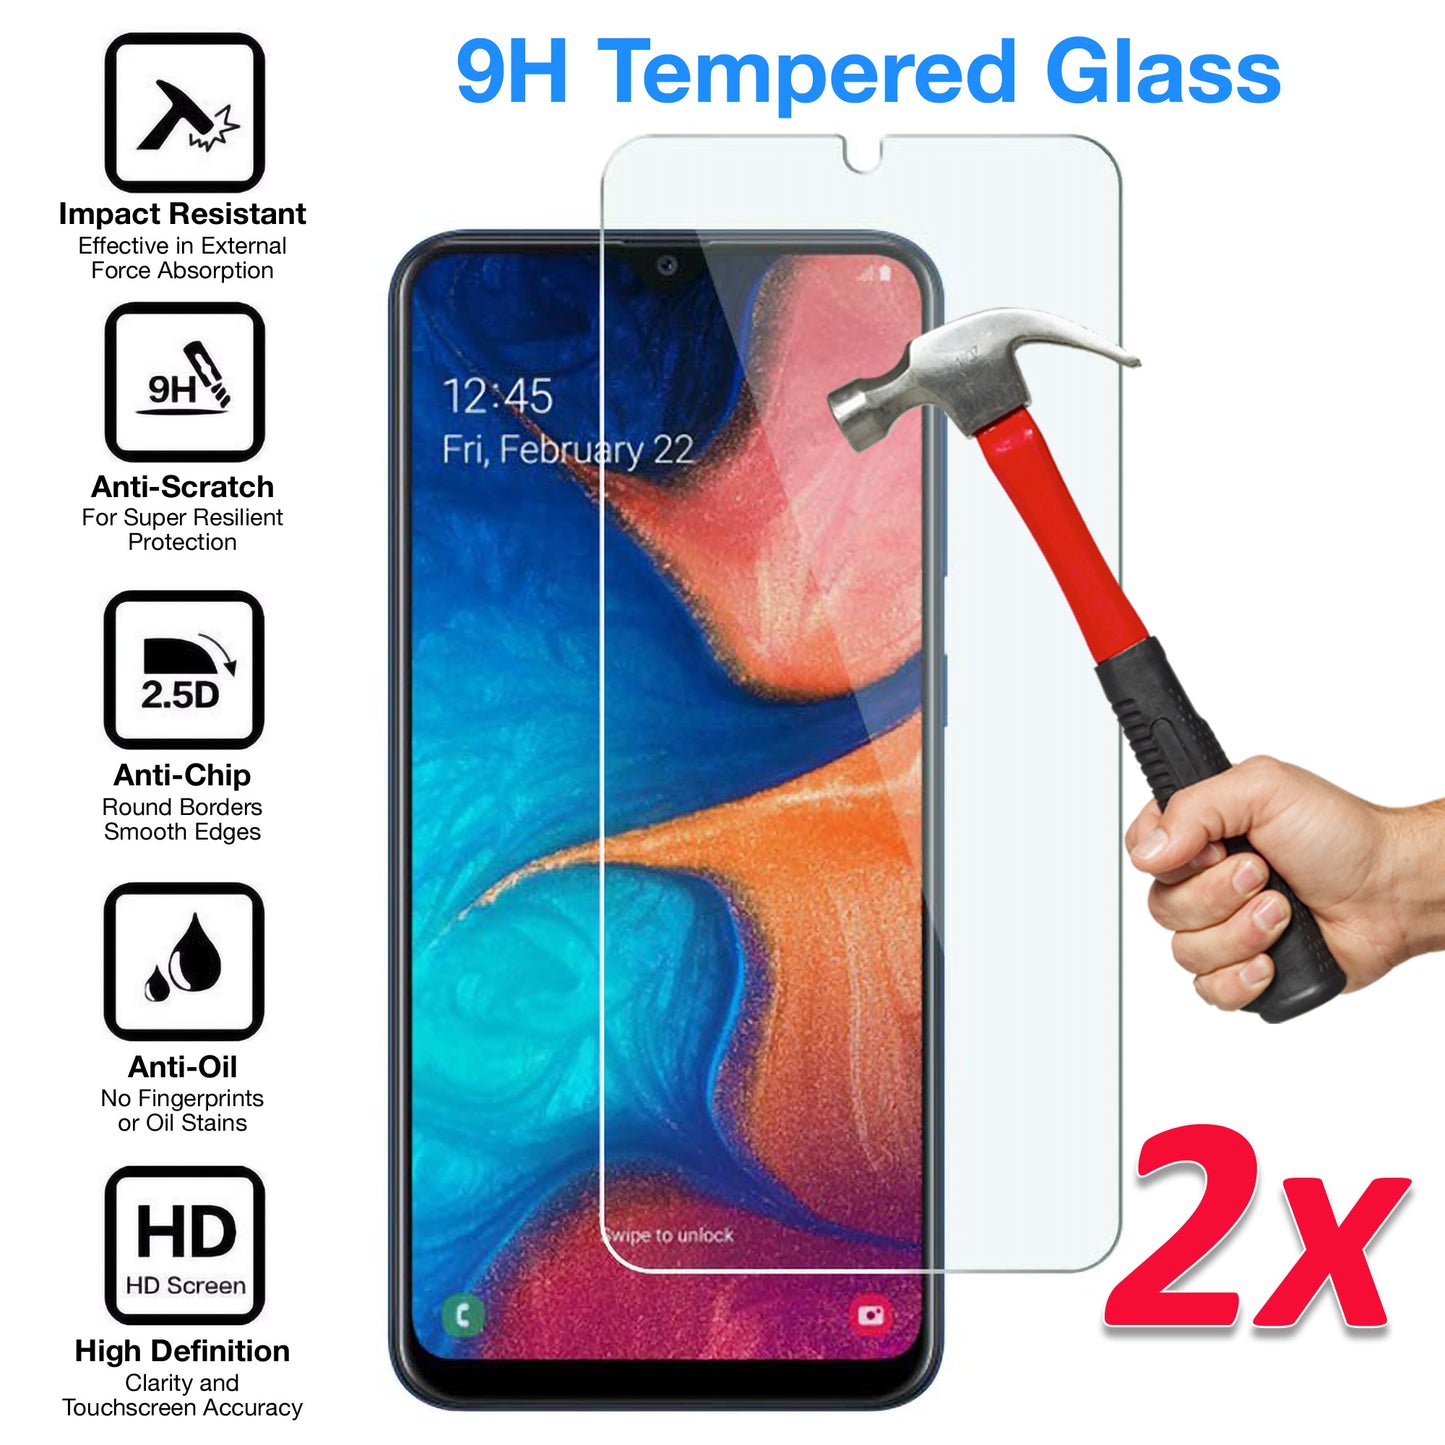 [2 Pack] MEZON Samsung Galaxy A20 Tempered Glass Crystal Clear Premium 9H HD Case Friendly Screen Protector (A20, 9H)